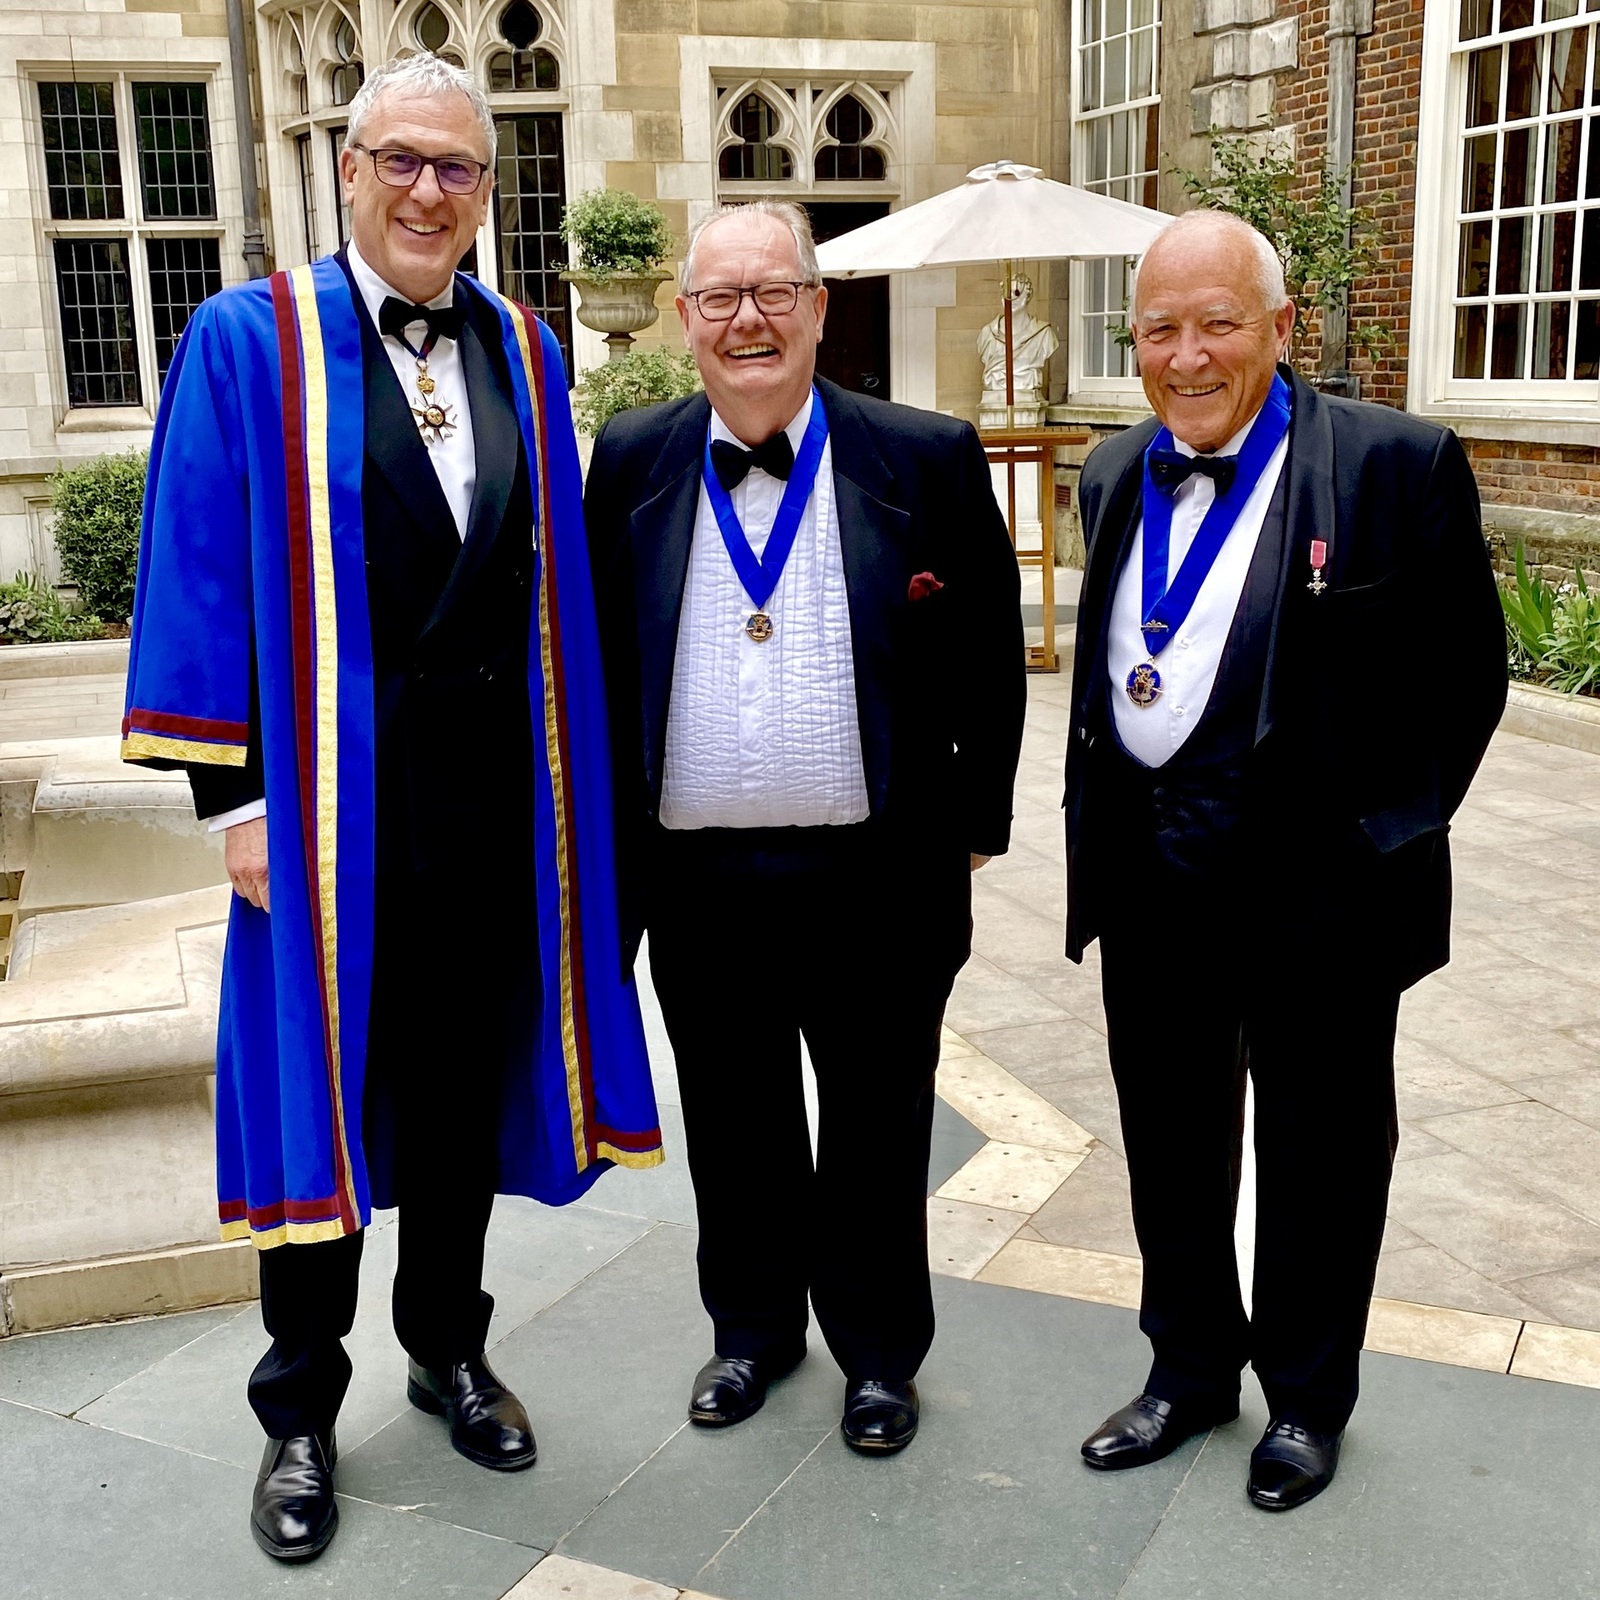 With new Hon Liveryman Sir Simon Fraser GCMG and Past Master Robert Woodthorpe Browne MBE at the World Traders Election Dinner